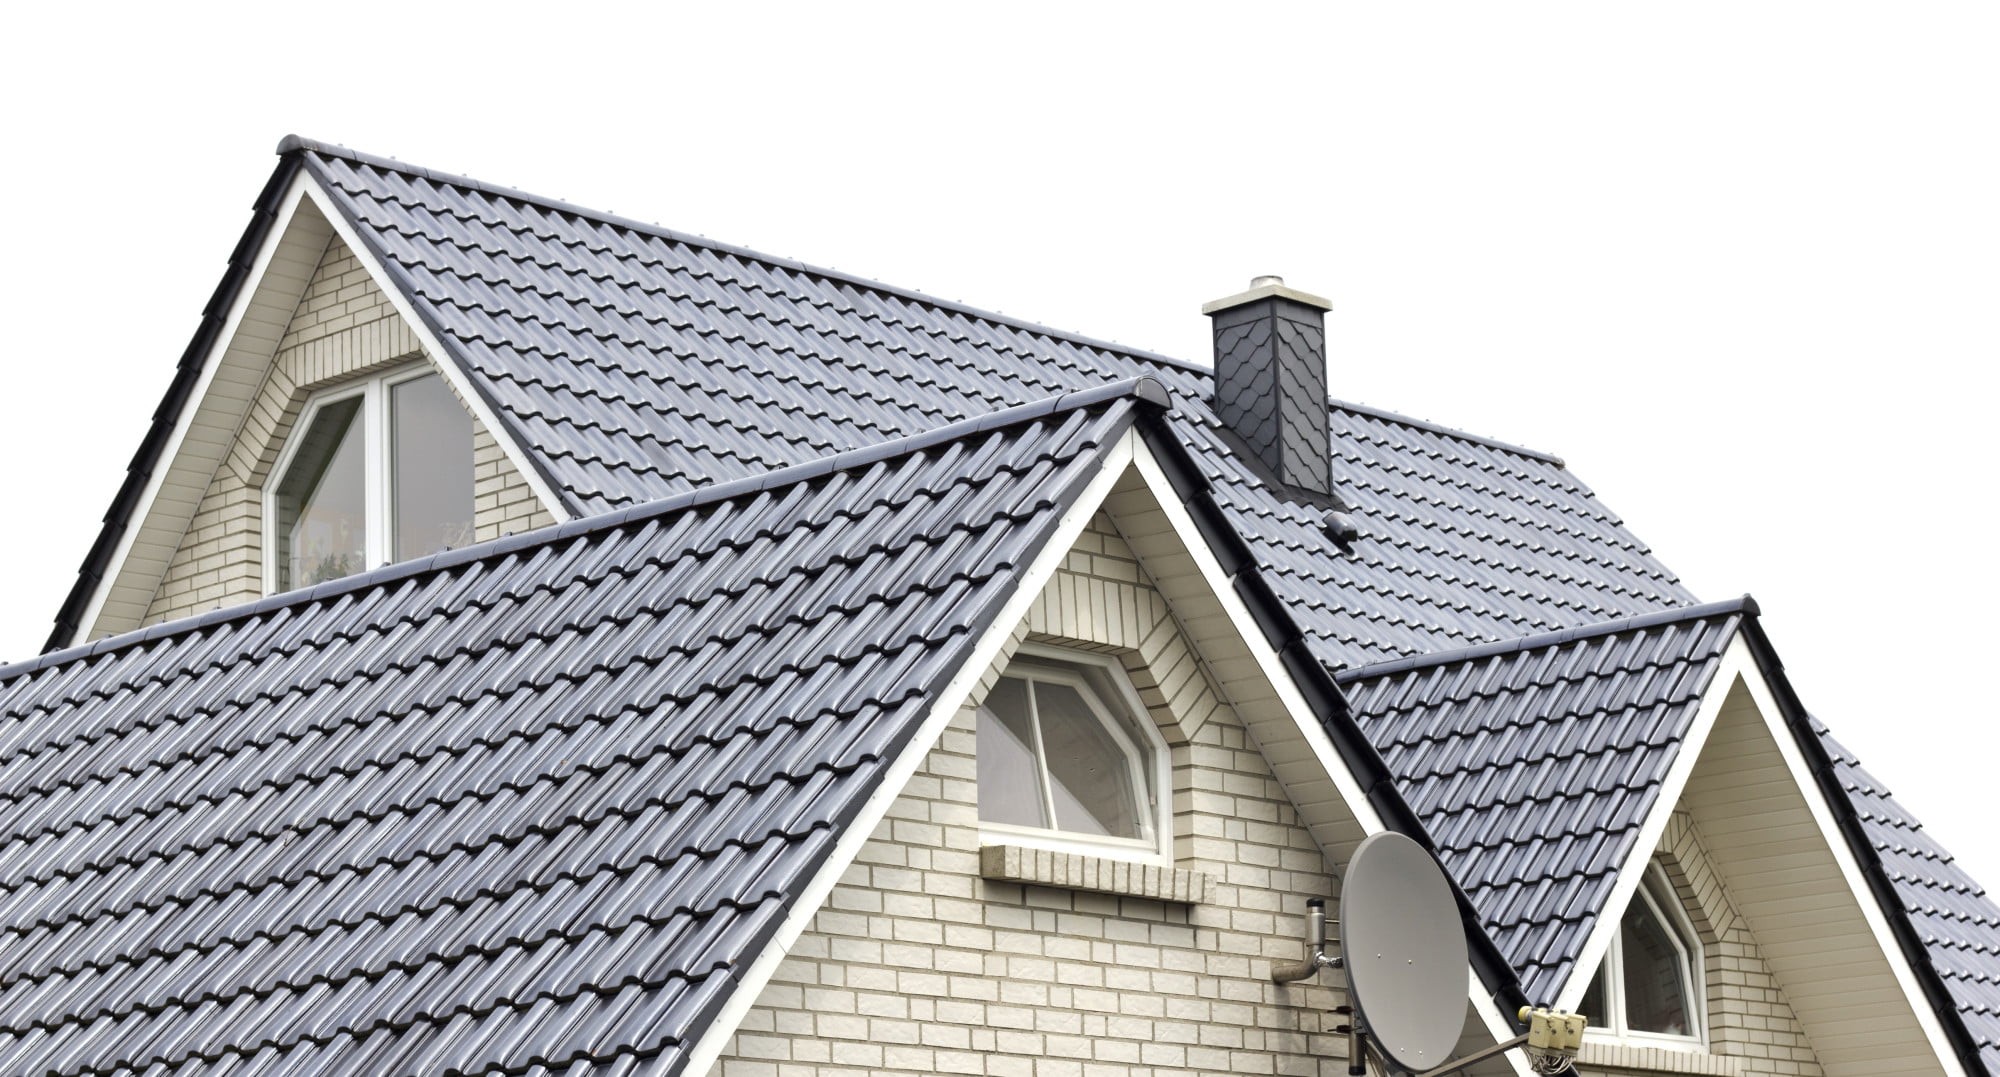 If your house is on the older side, there are many subtle signs that can let you know it's time for a new roof - and it's important to be aware. Click to learn.